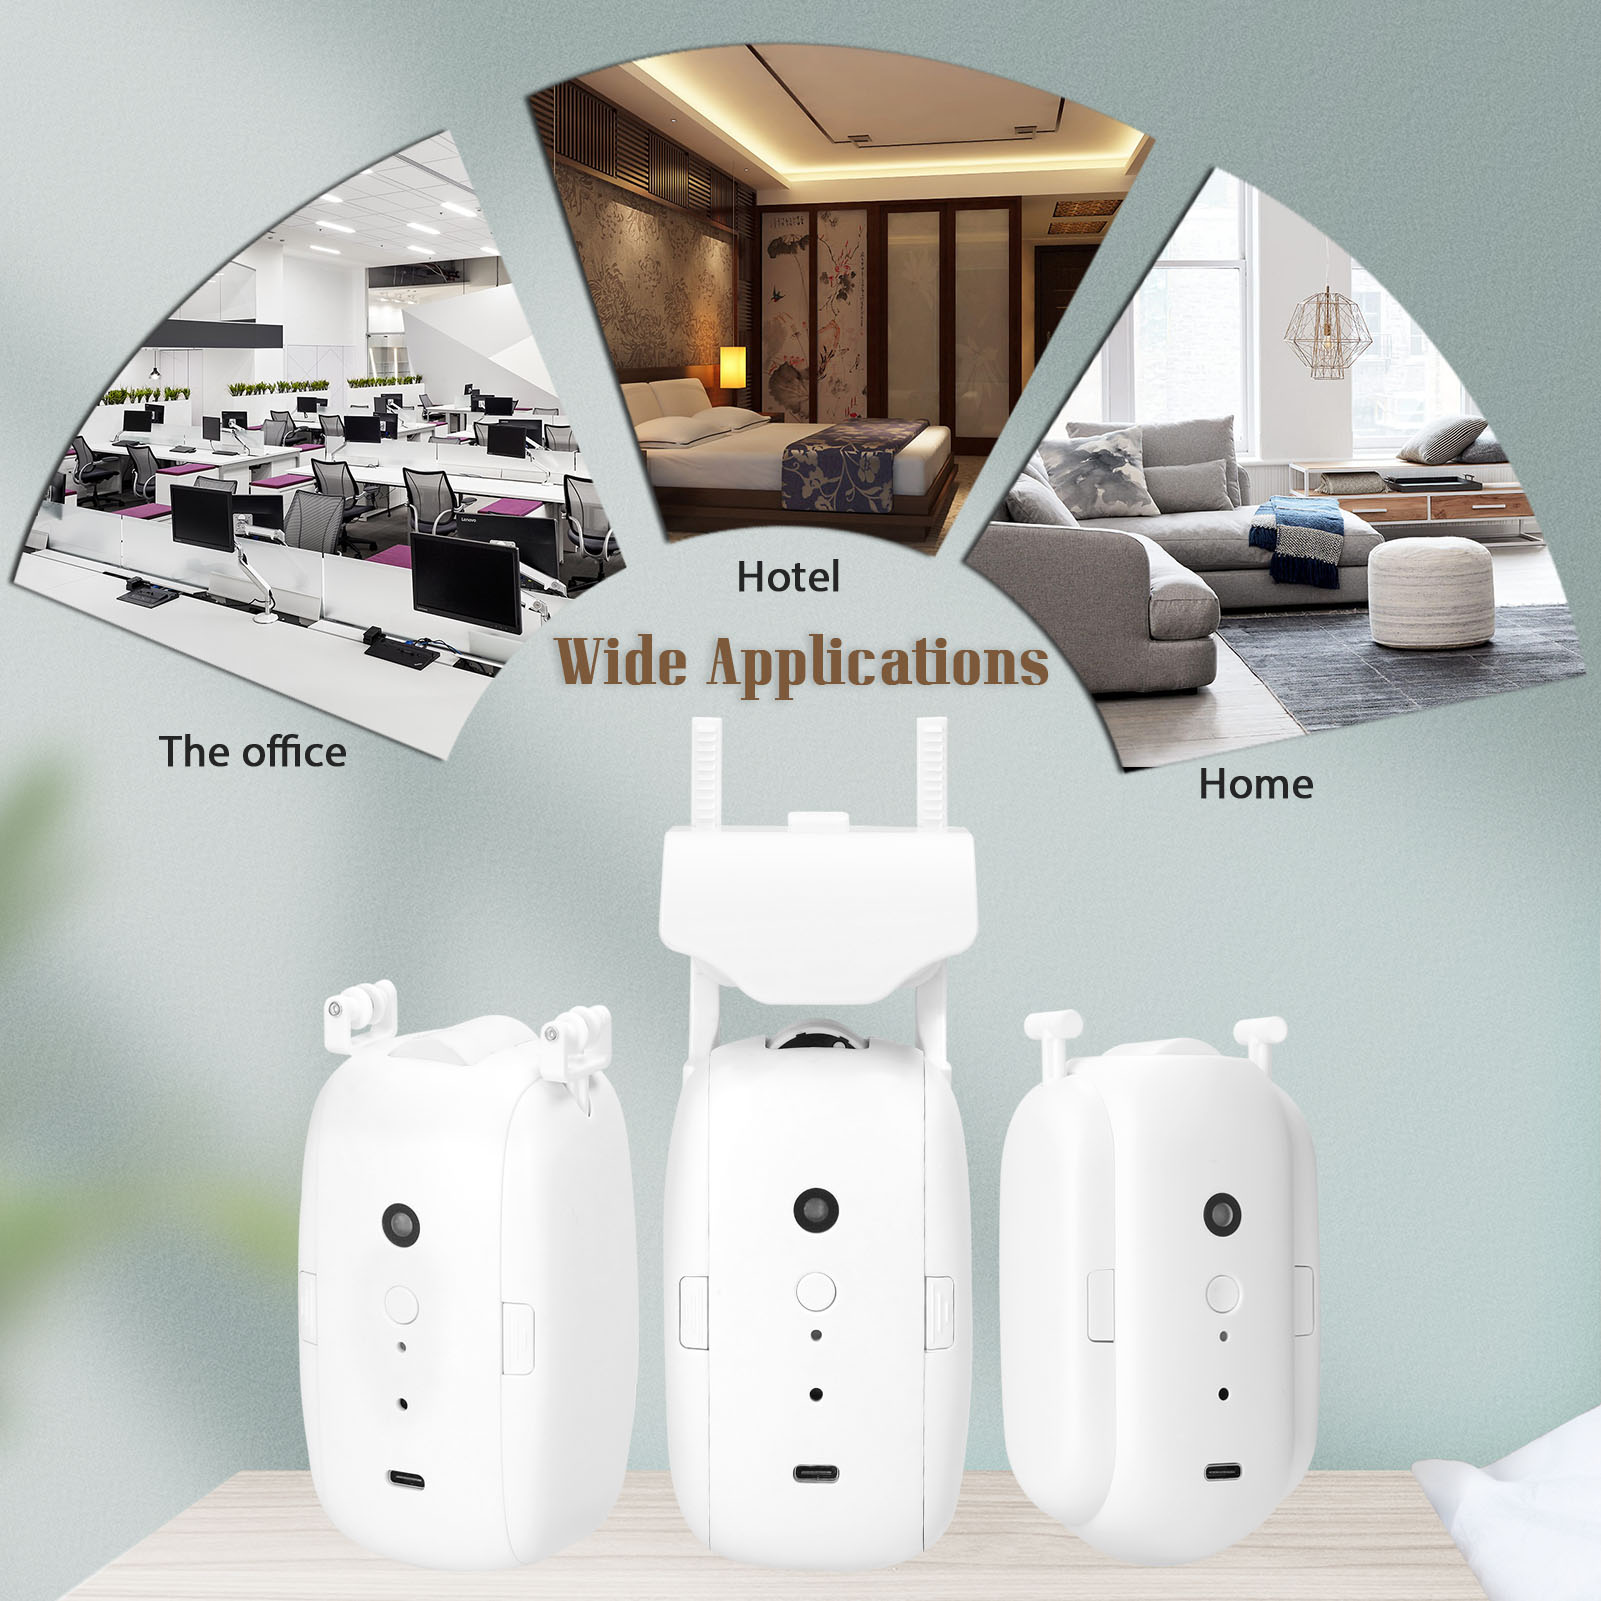 Intelligent Curtain Motor Electric Curtain Robot Automatic Opener No Wiring  Support APP Remote Control Timer Setup & Sensing Compatible with Home for  Roman Rod 